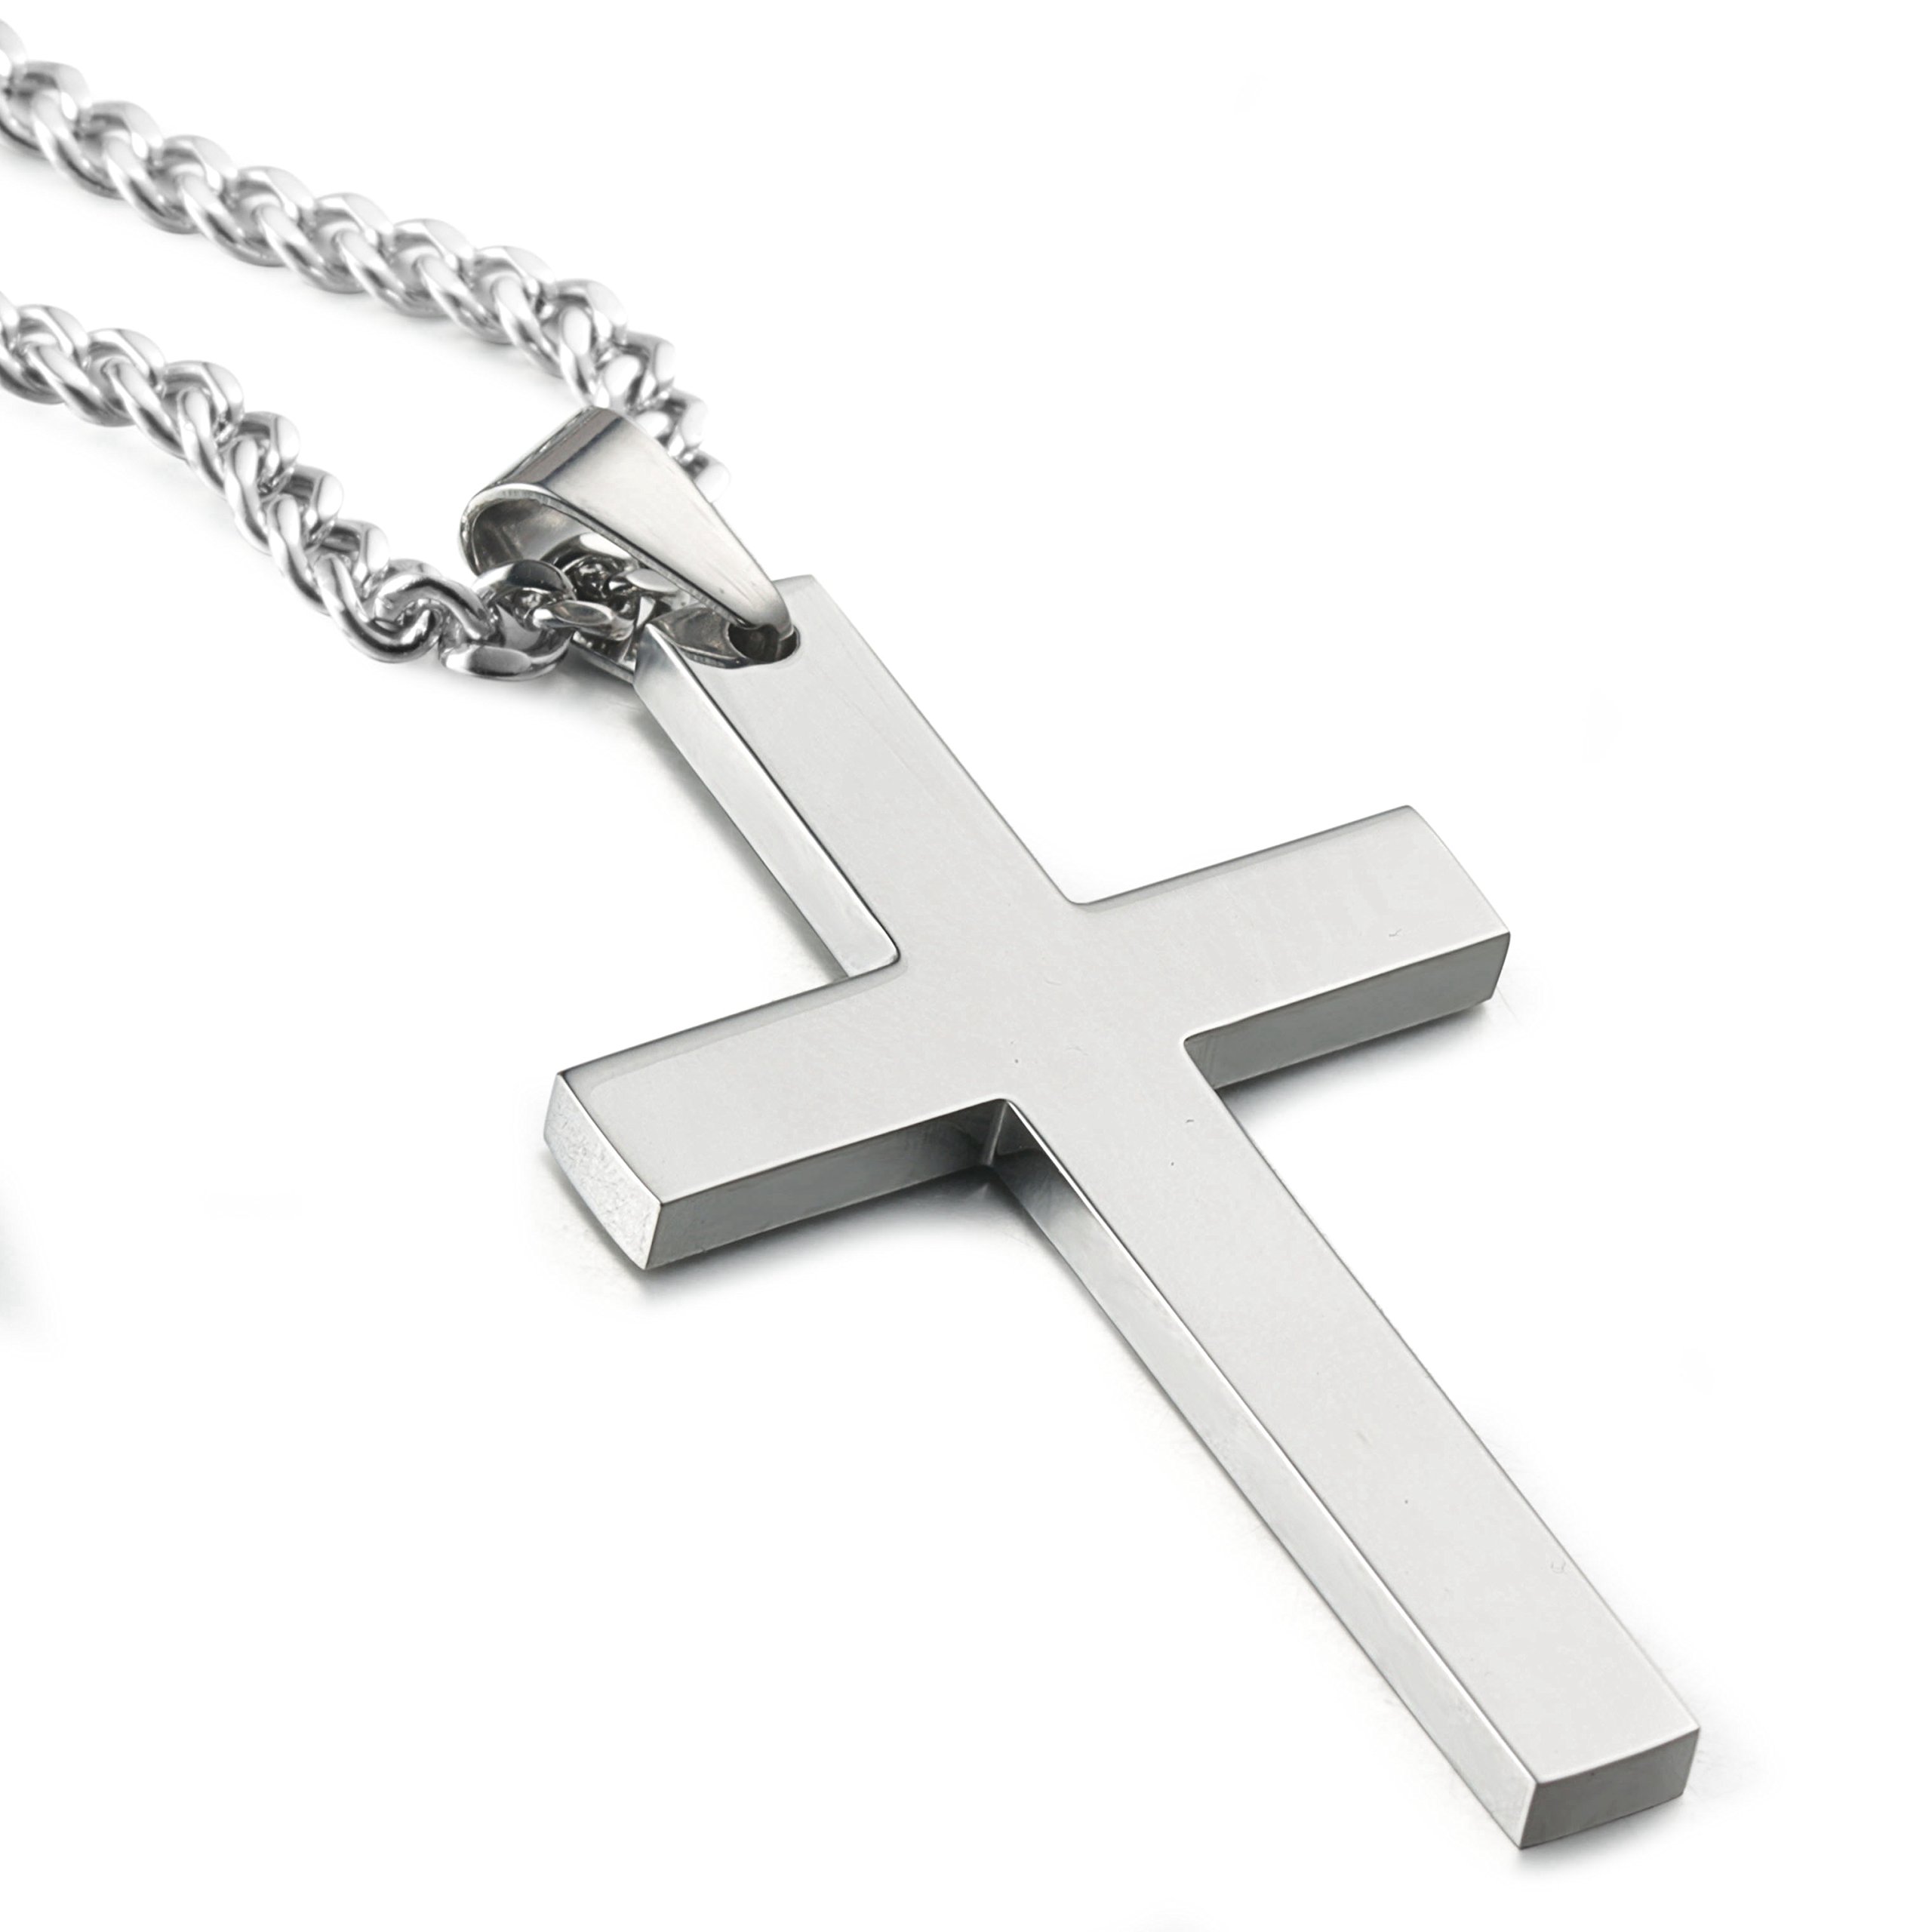 FIBO STEEL Stainless Steel Cross Pendant Chain Necklace for Men Women, 22-30 Inches